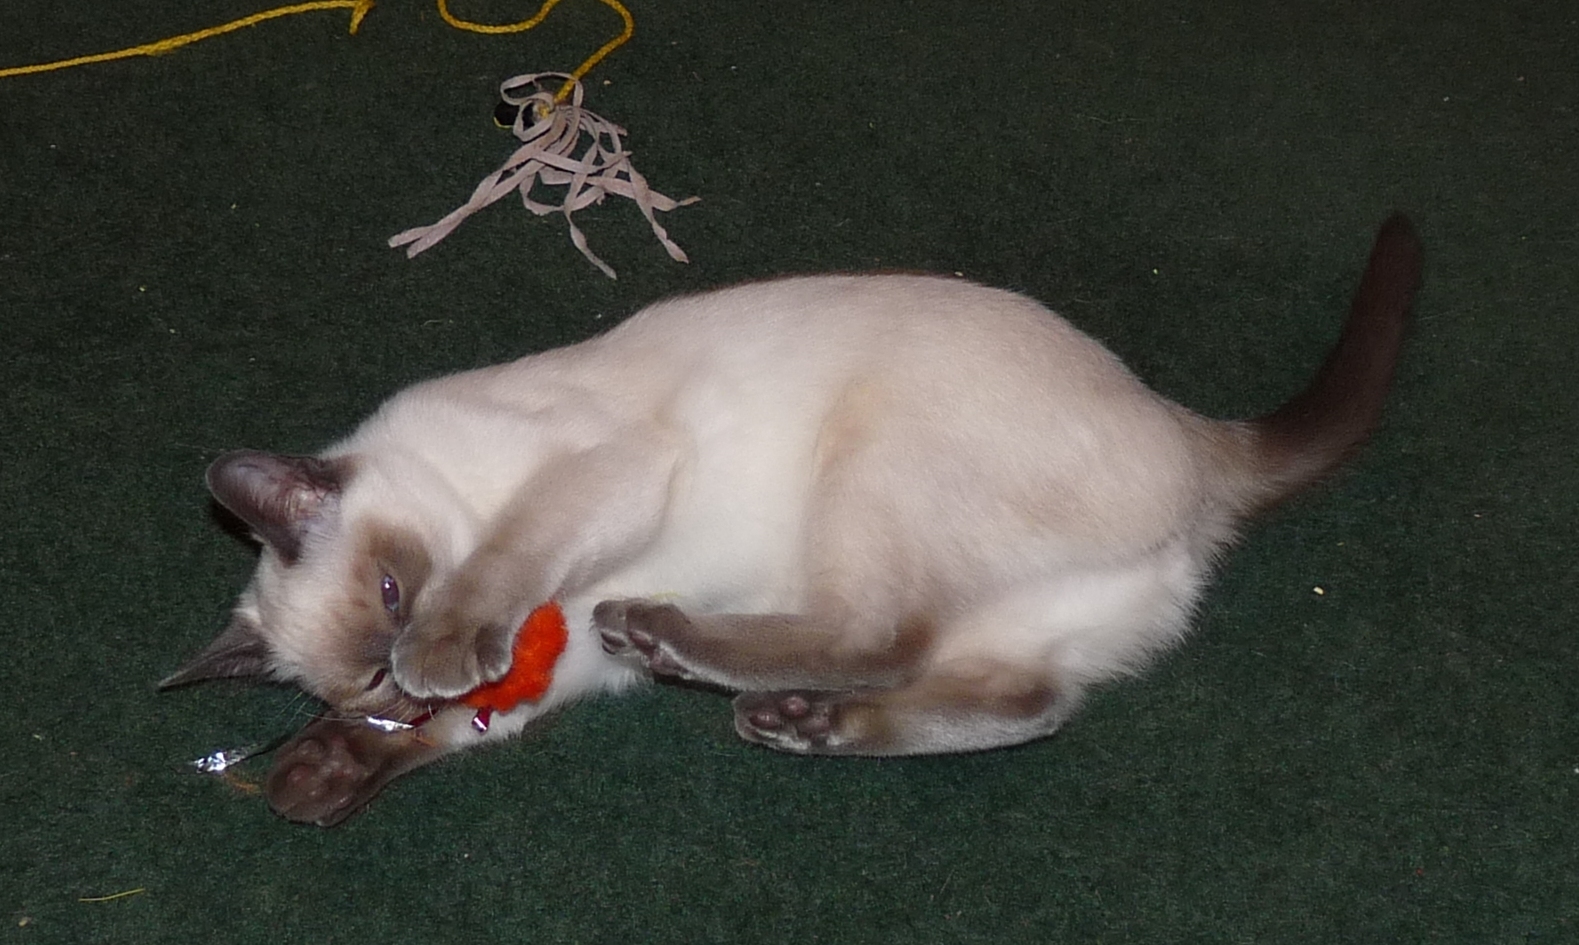 Starlight, an American Siamese cat, playing with a red toy.